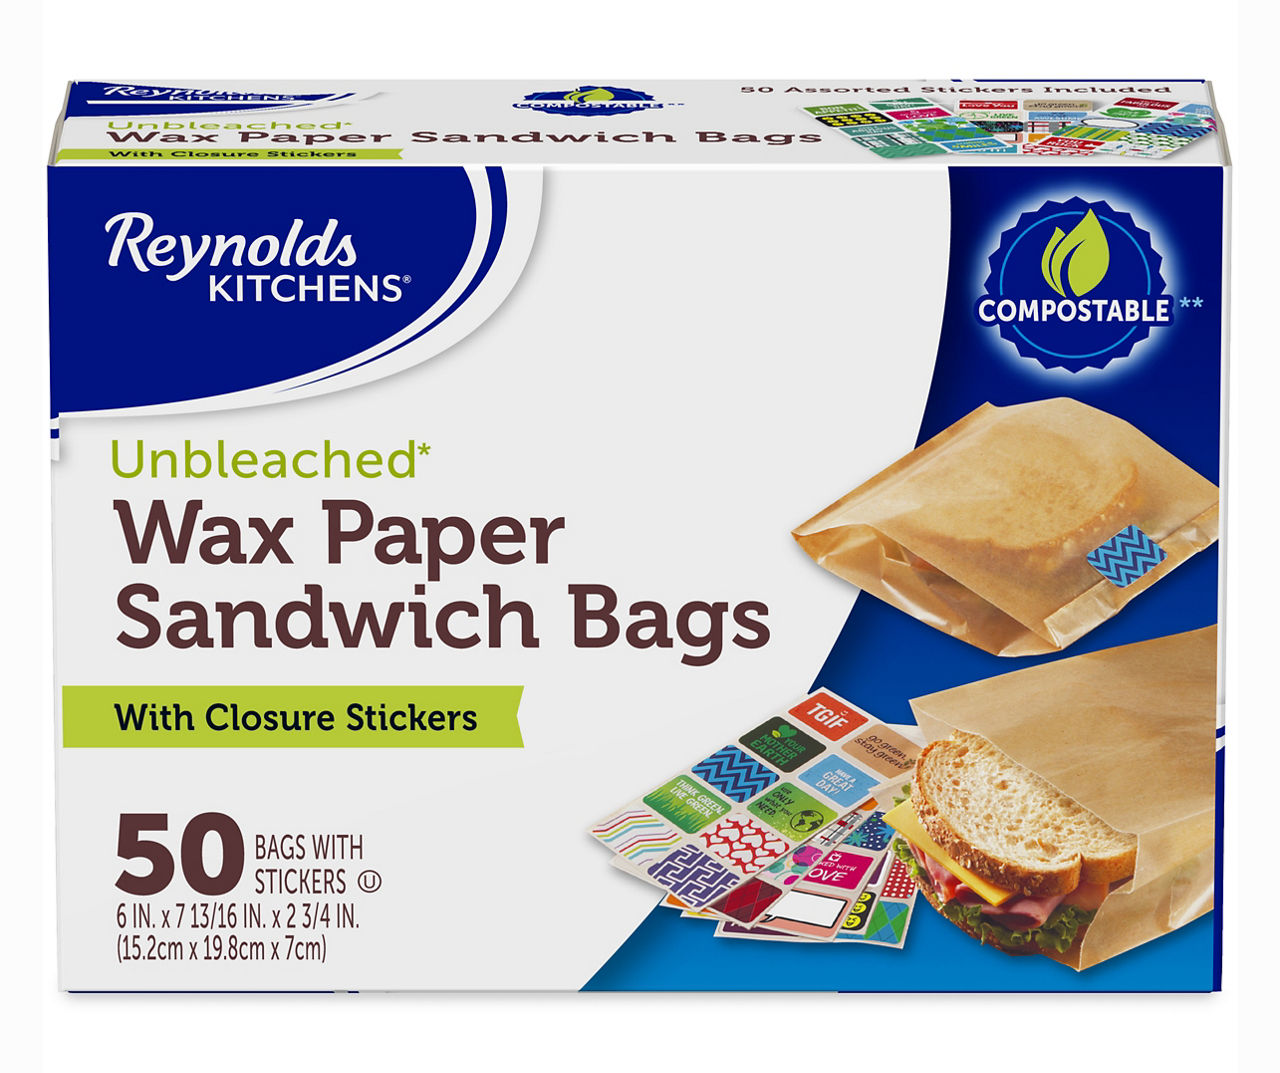 Reynolds Reynolds Kitchens Unbleached Wax Paper Sandwich Bags with Closure  Stickers 50 ct Box